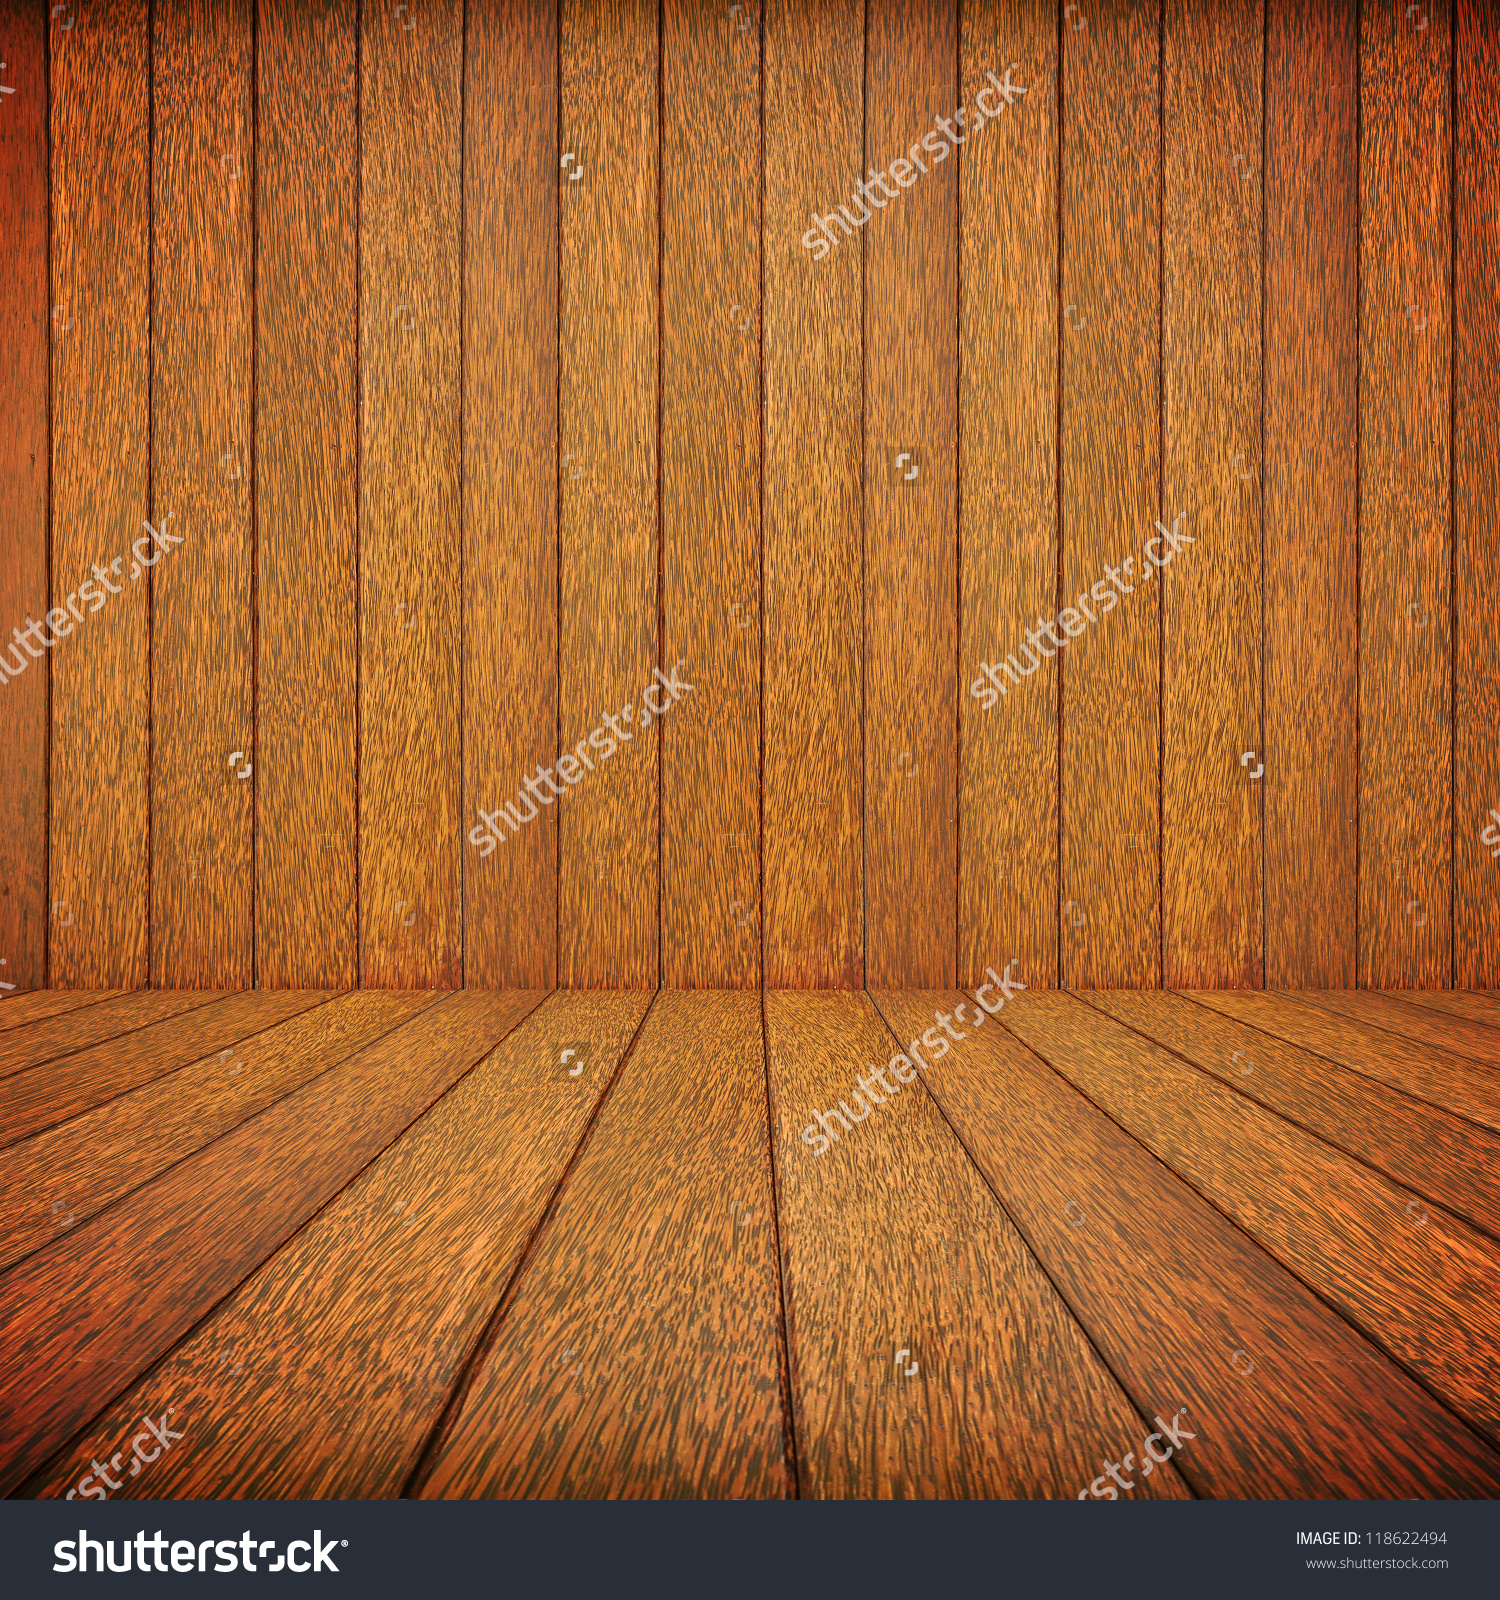 Small Multiple Rectangular Pieces Of Wood As Background Stock Photo